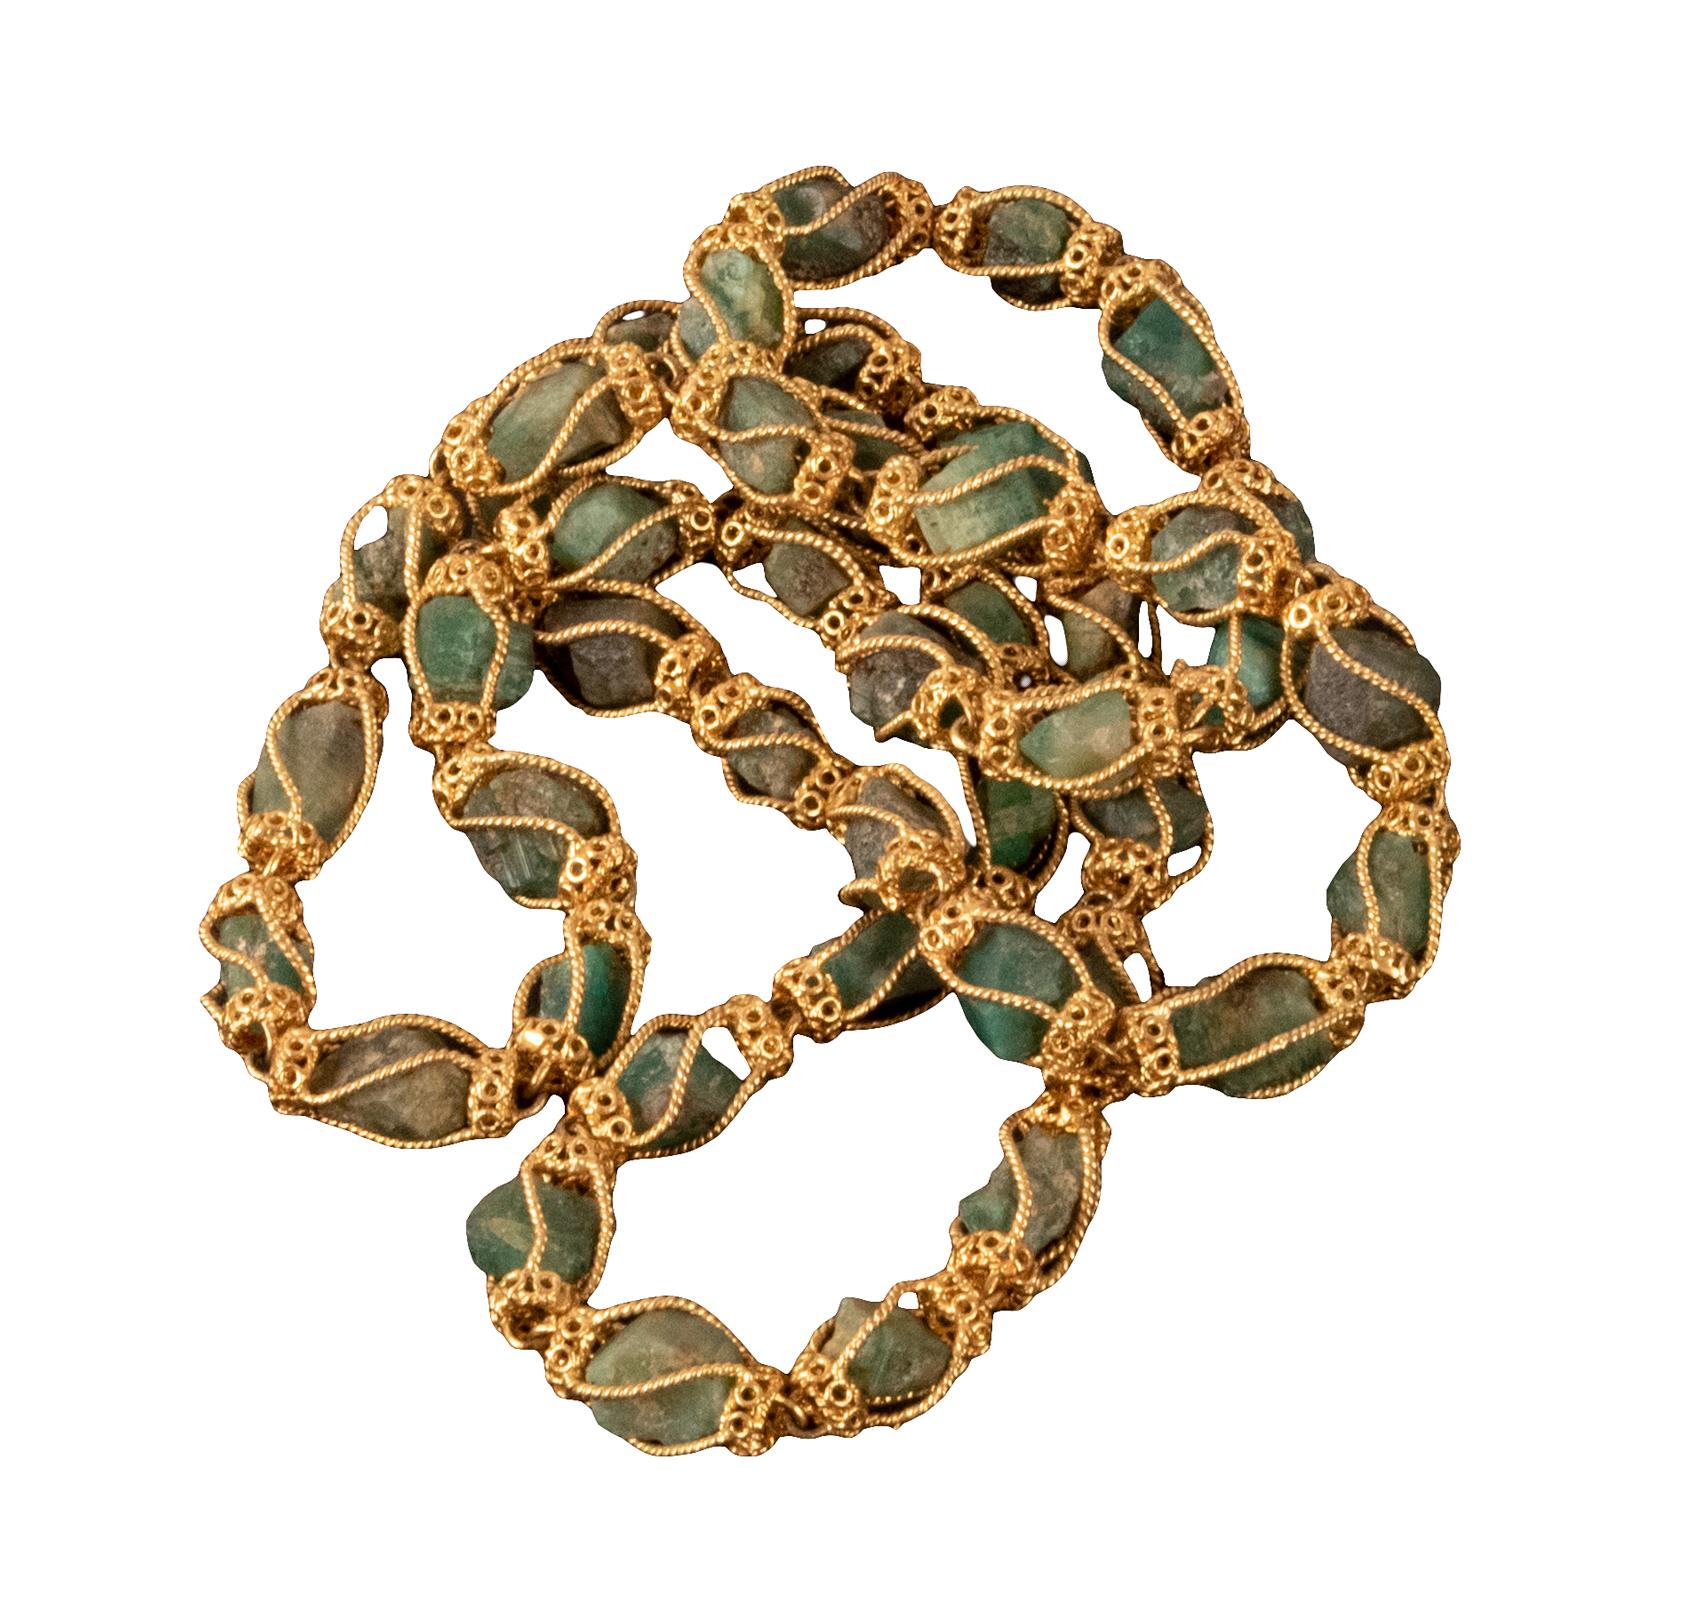 Comprised of forty-four 18-karat yellow gold filigree-caged raw emerald crystal beads. Total length: 34.5 in. / 87.5 cm. Estimated to contain approximately 1.50 ozt of pure gold.

DWT 82.1.